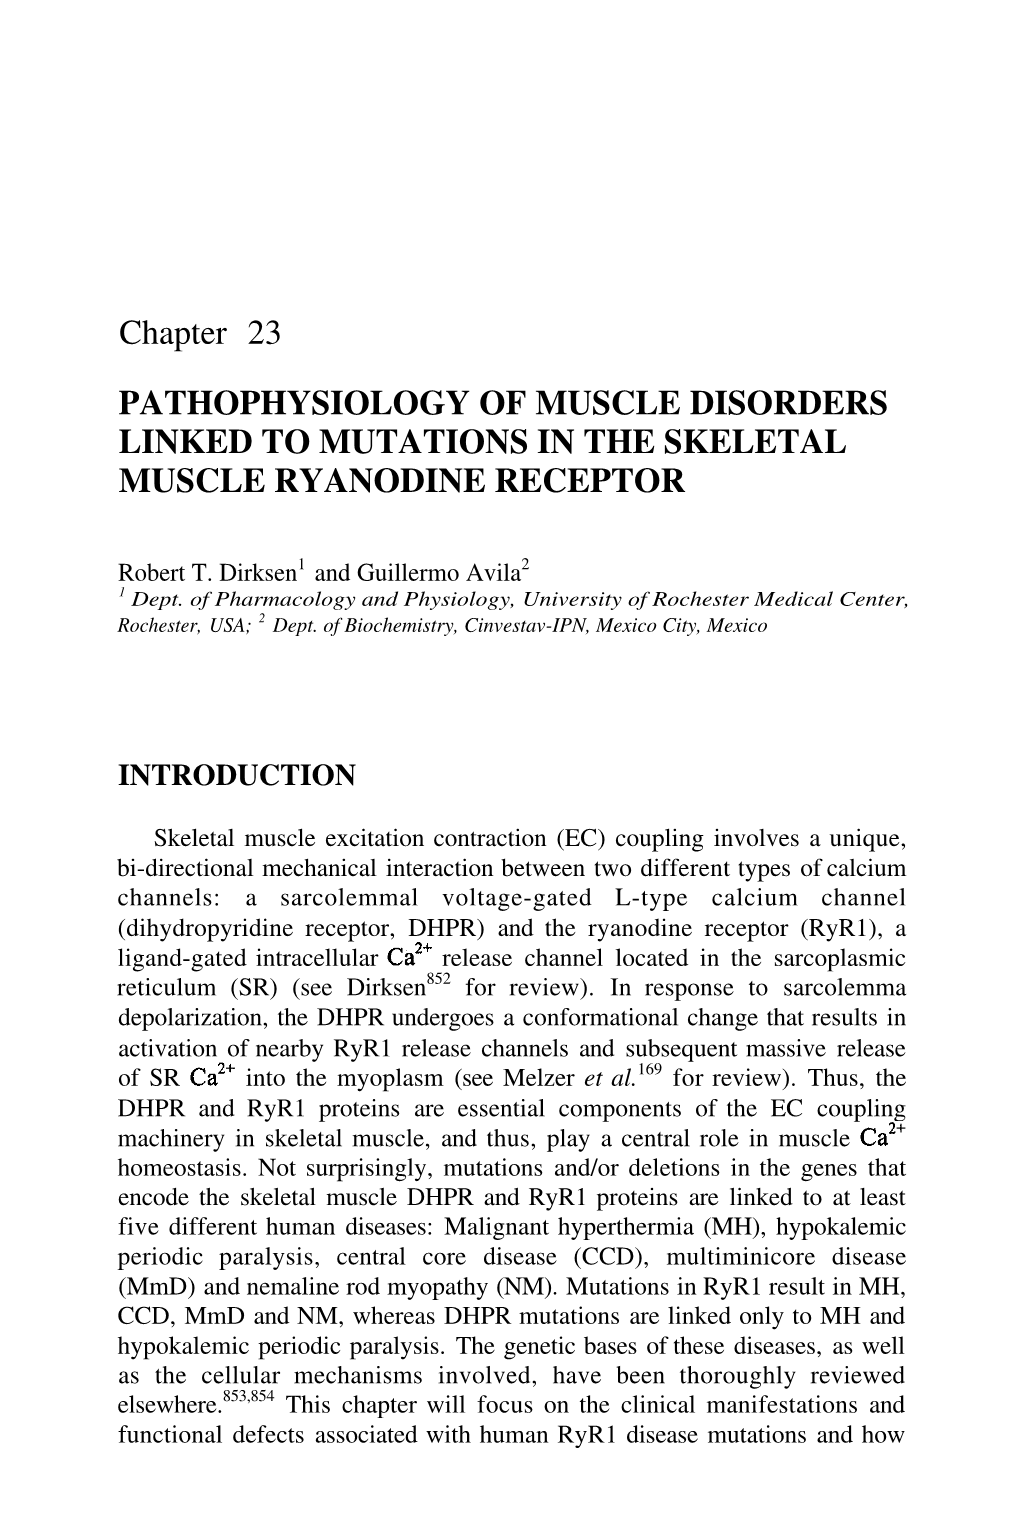 Chapter 23 PATHOPHYSIOLOGY of MUSCLE DISORDERS LINKED TO